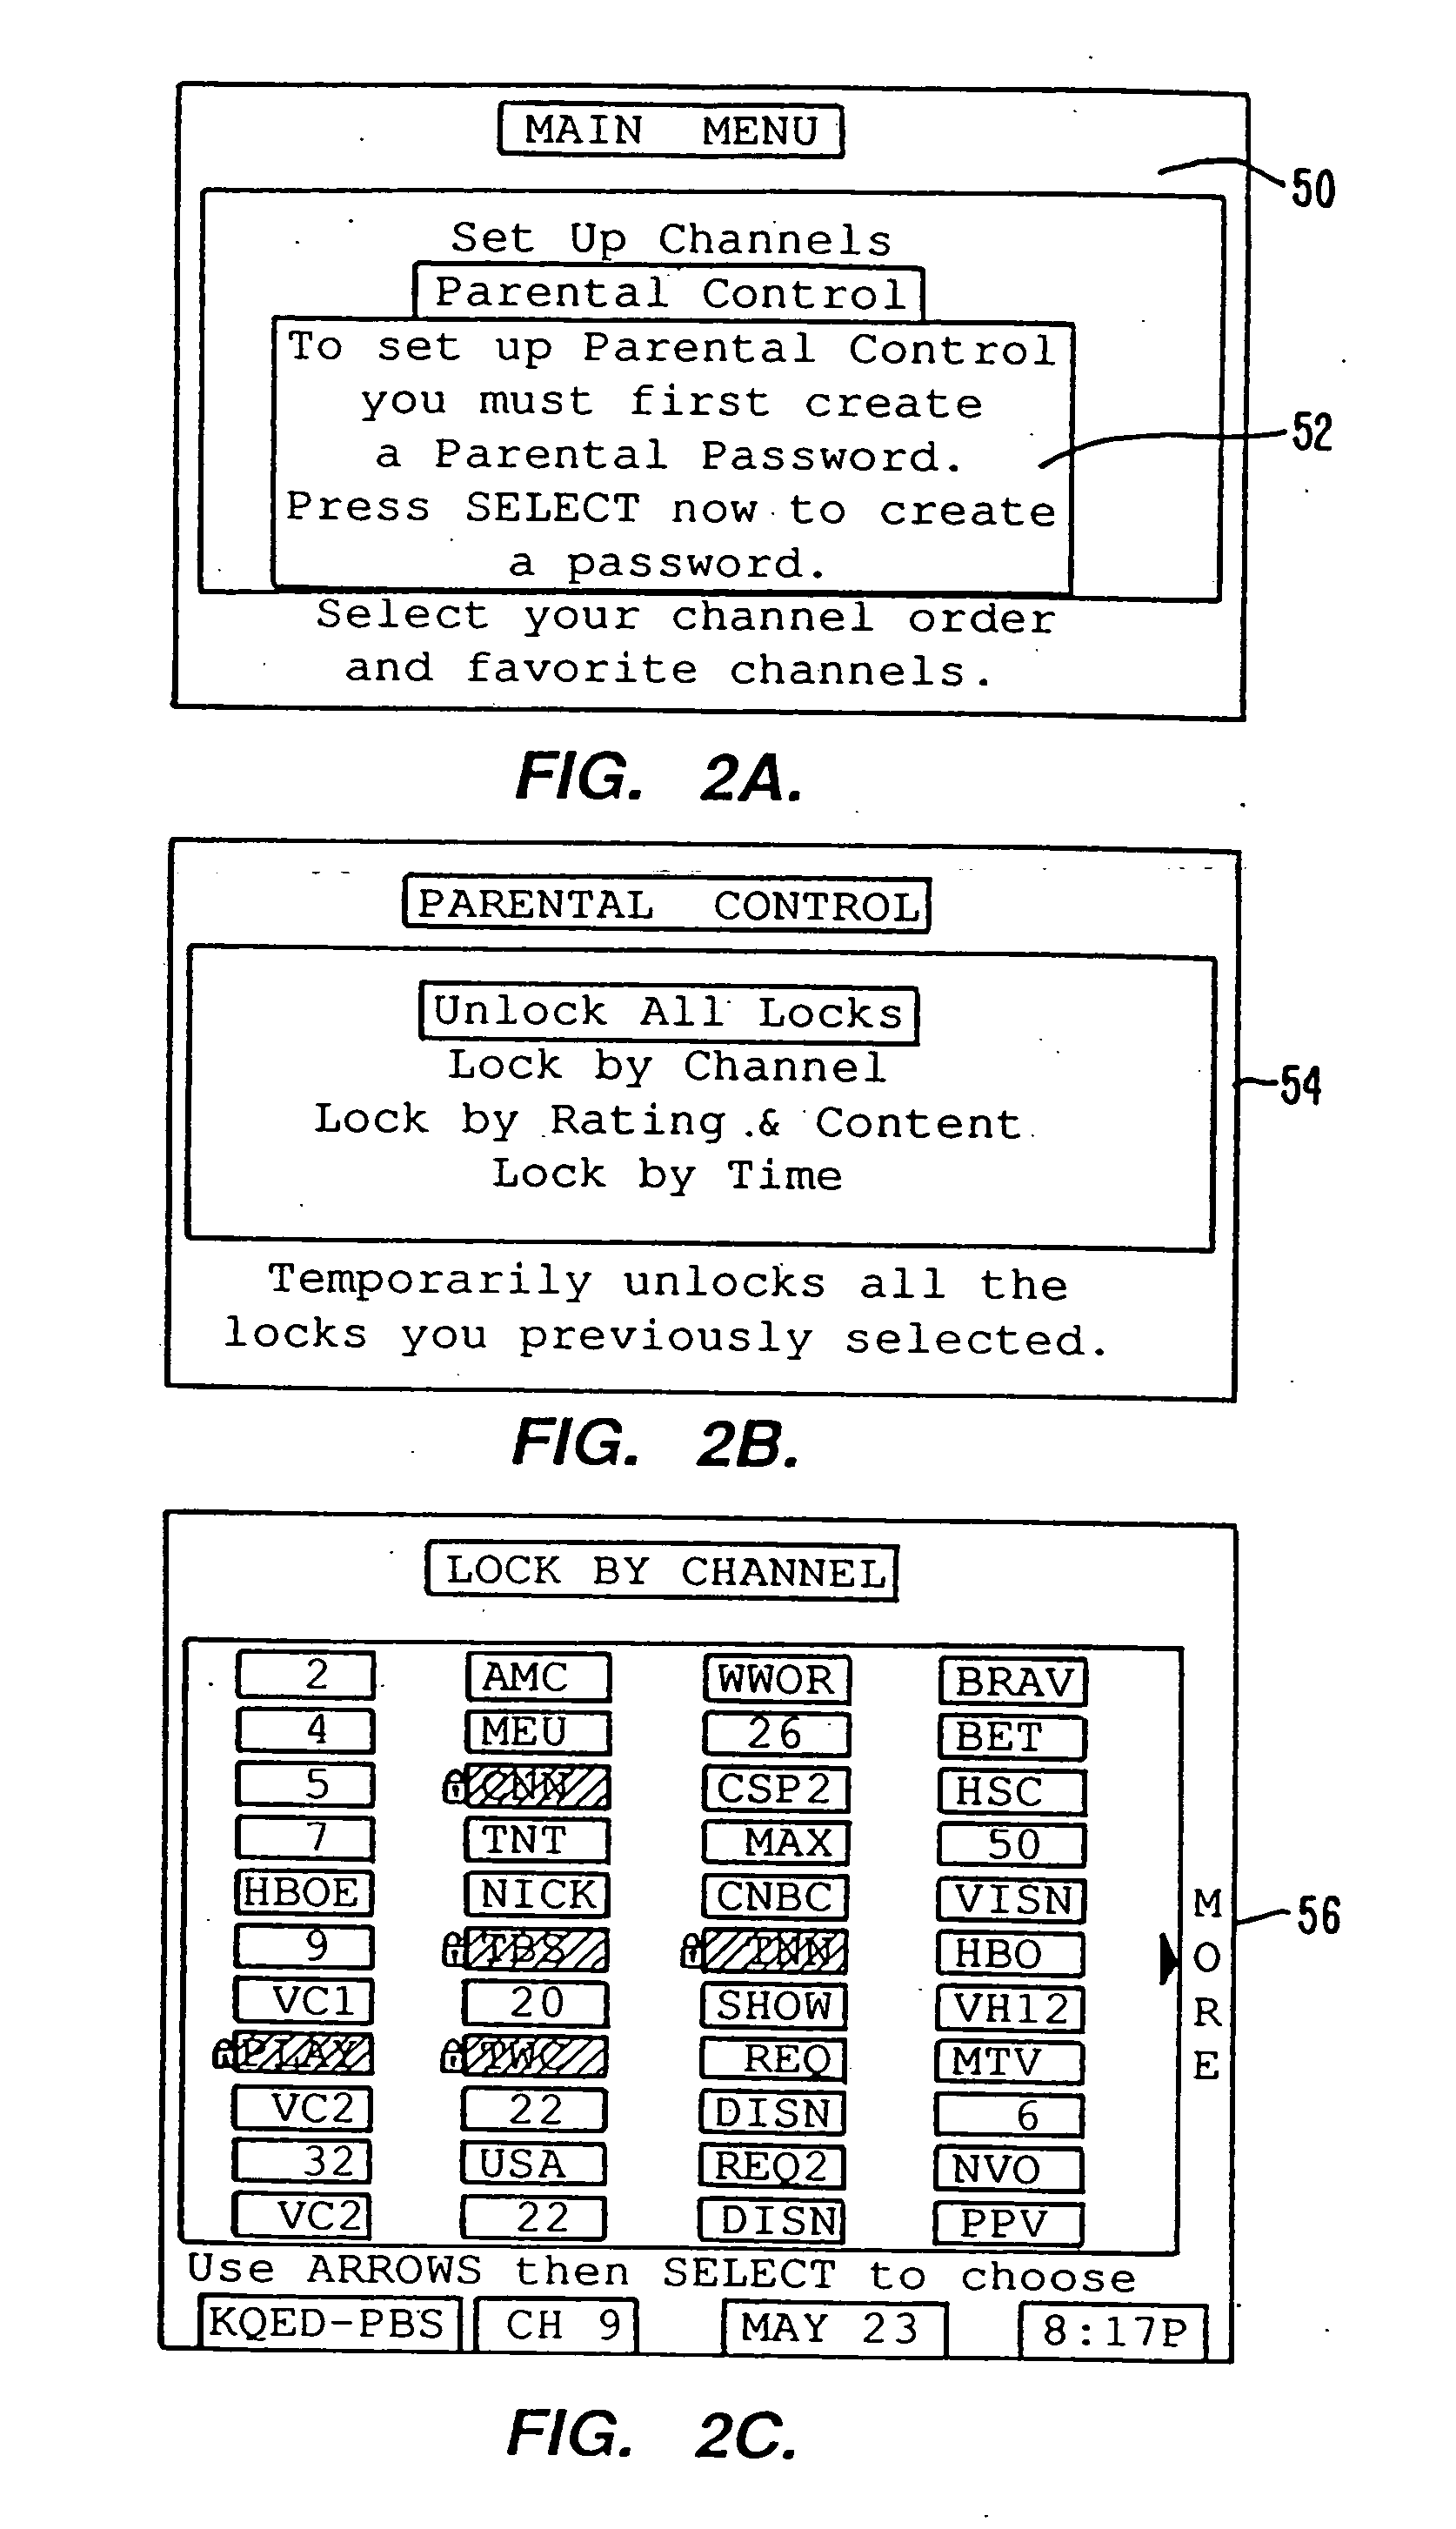 Television schedule system with access control